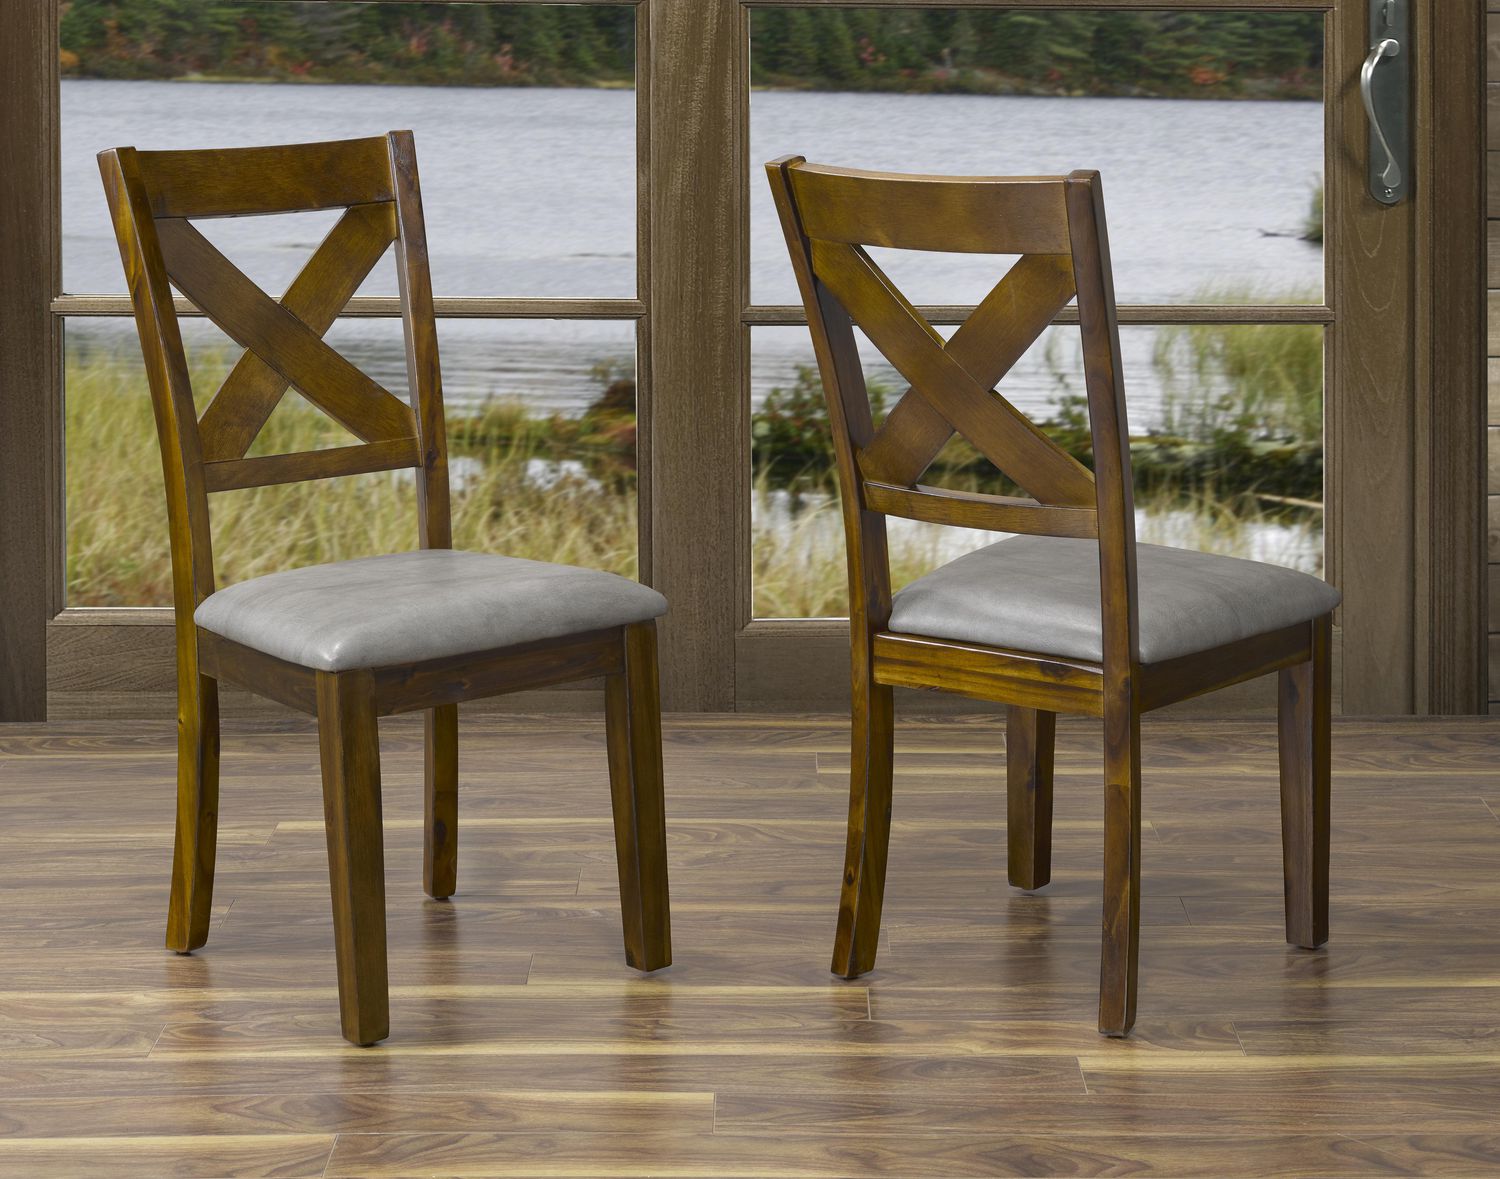 KLiving Coral X Back Solid Wood Dining Chair in Walnut Bown Finish (Set of 2) Walmart Canada